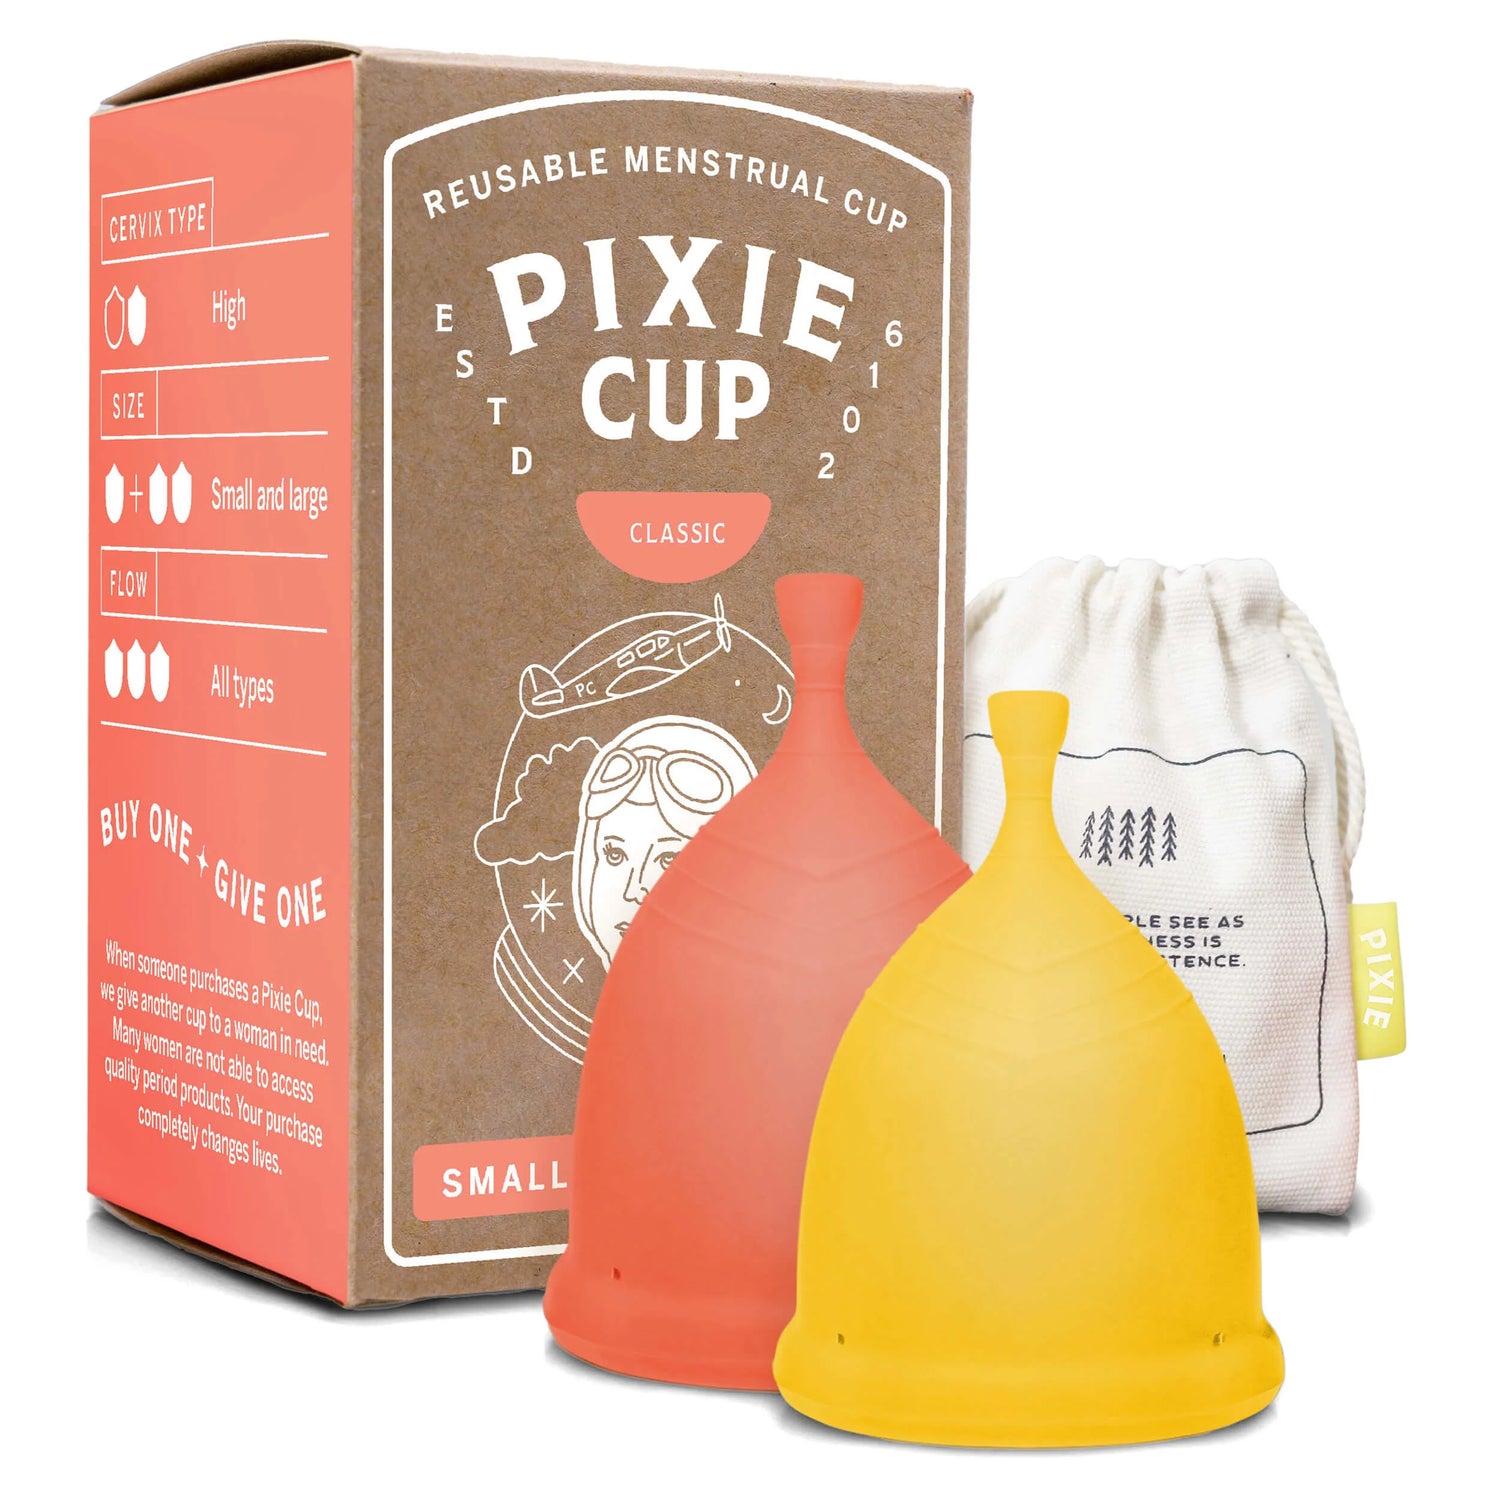 Pixie Cup - Menstrual Cup Combo Pack